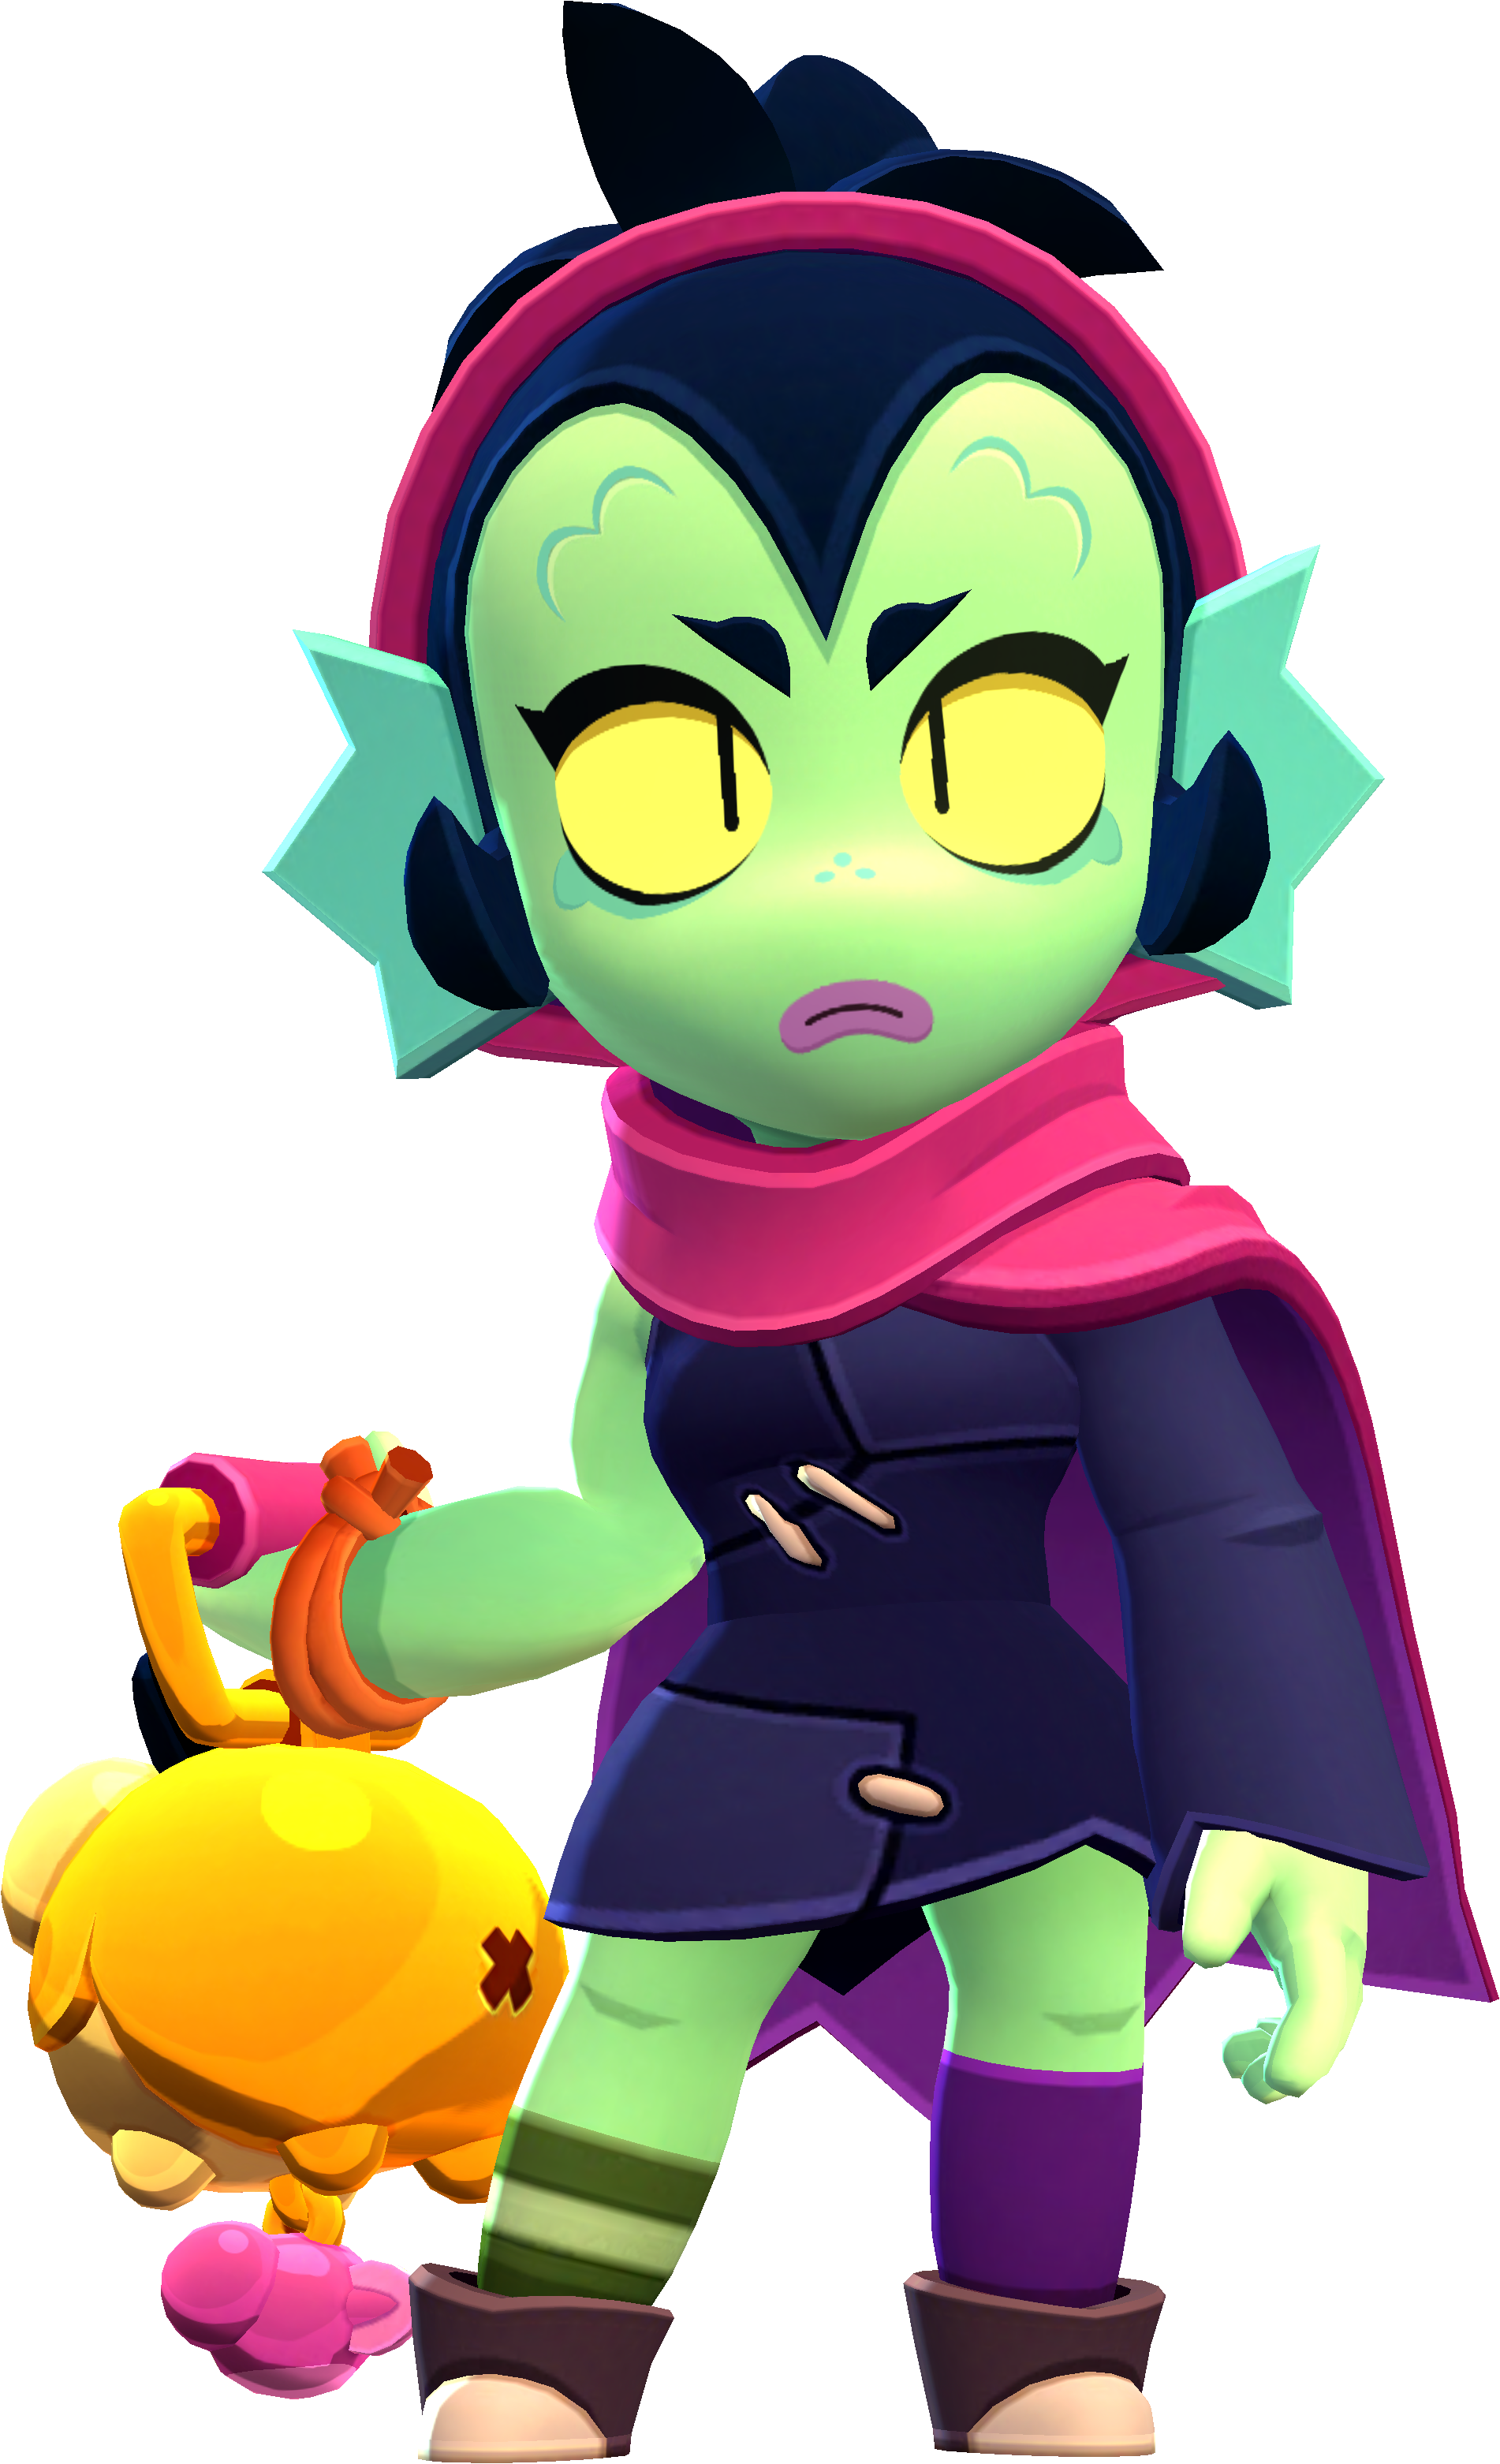 https://static.wikia.nocookie.net/brawlstars/images/4/40/Willow_Skin-Default.png/revision/latest?cb=20230302001249